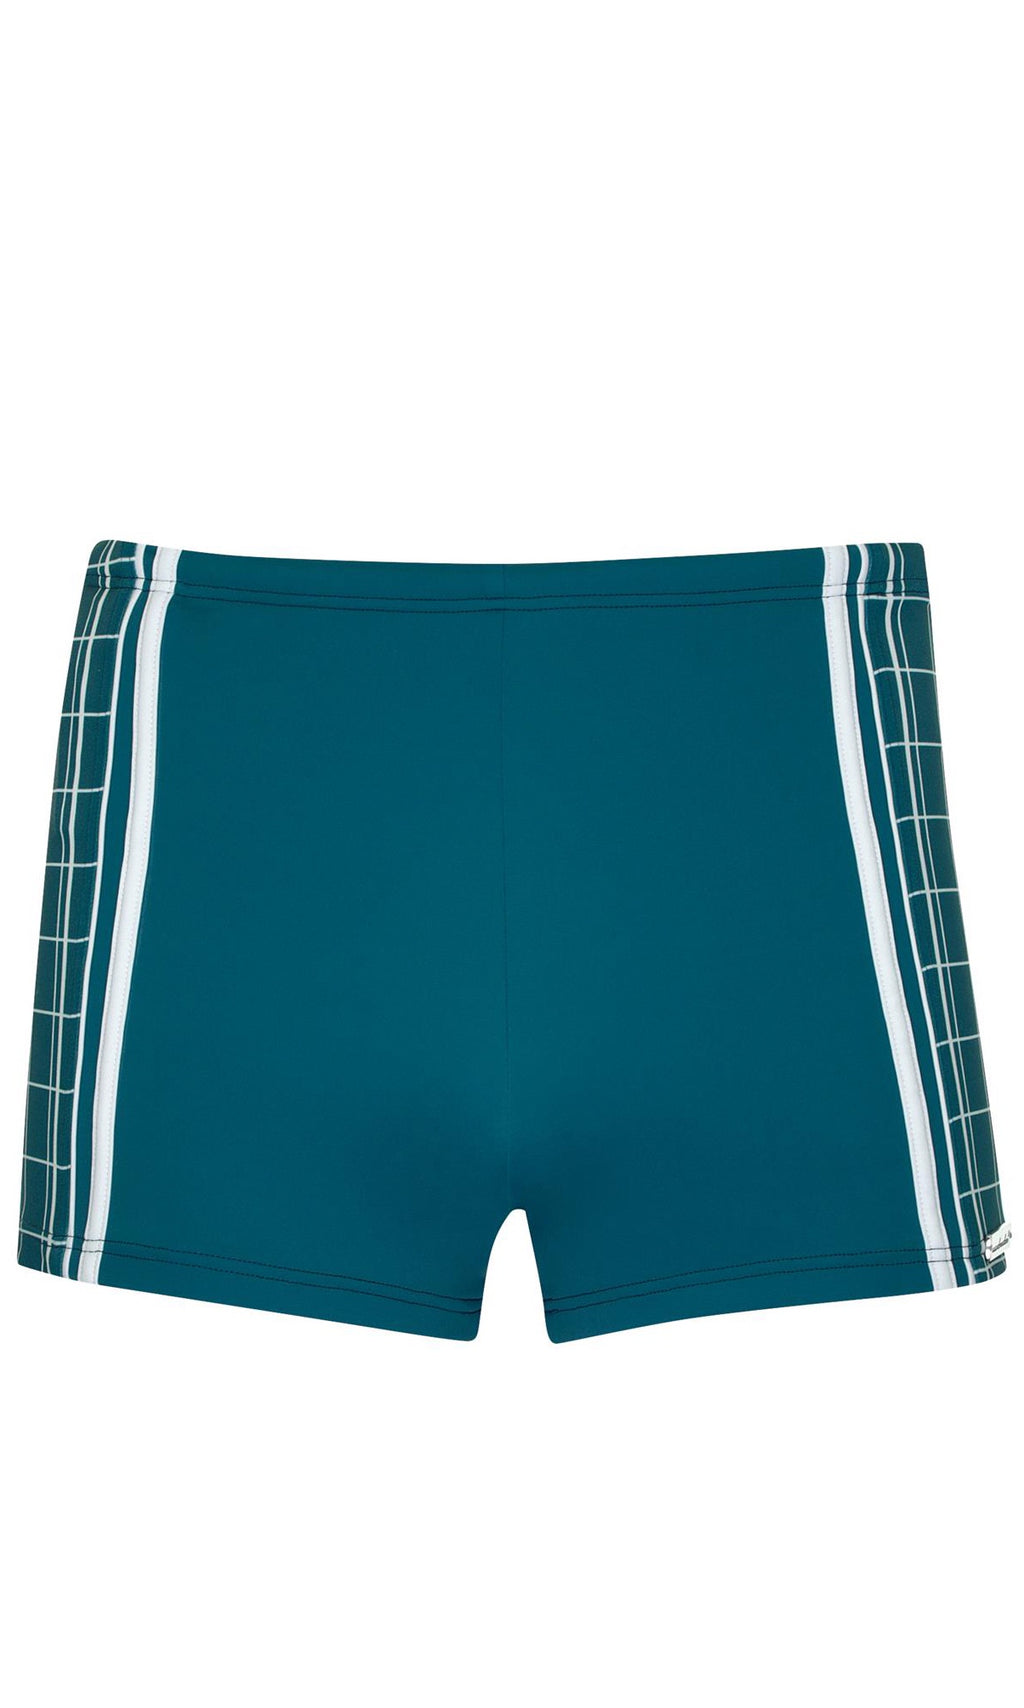 Classic Trunks Green Oasis, Special Order S - XL.